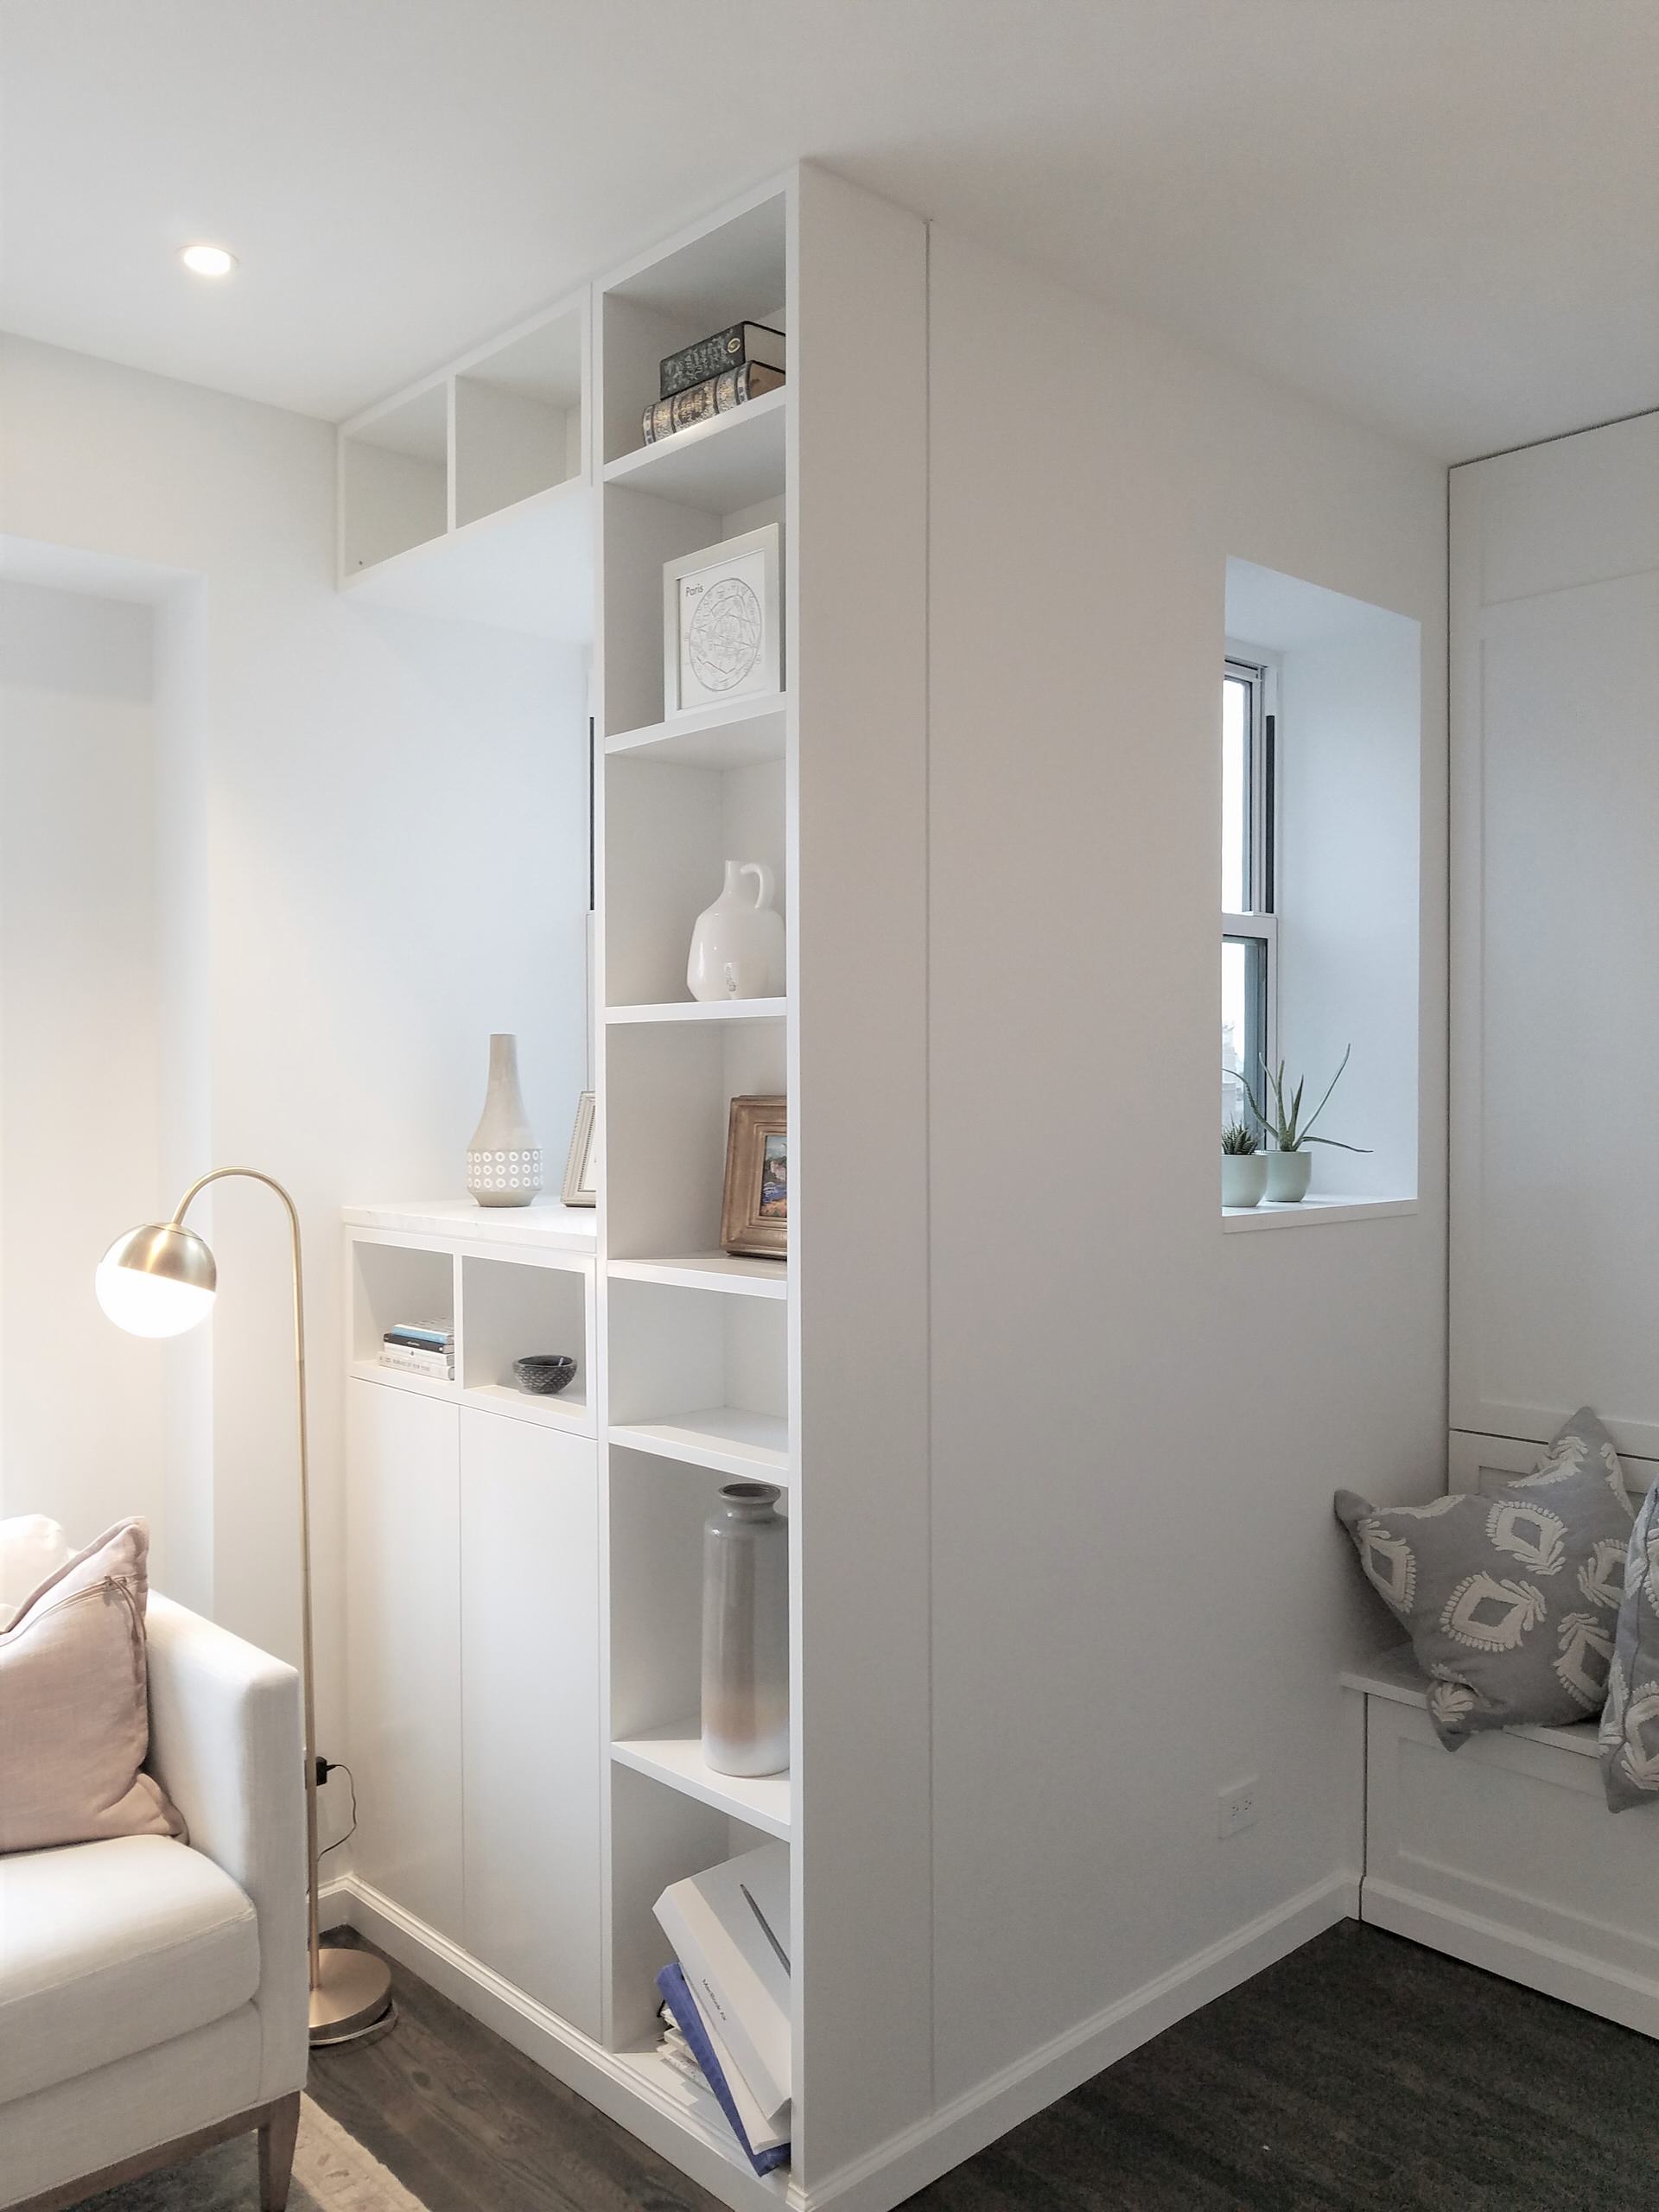 Maximizing small NYC apartment spaces